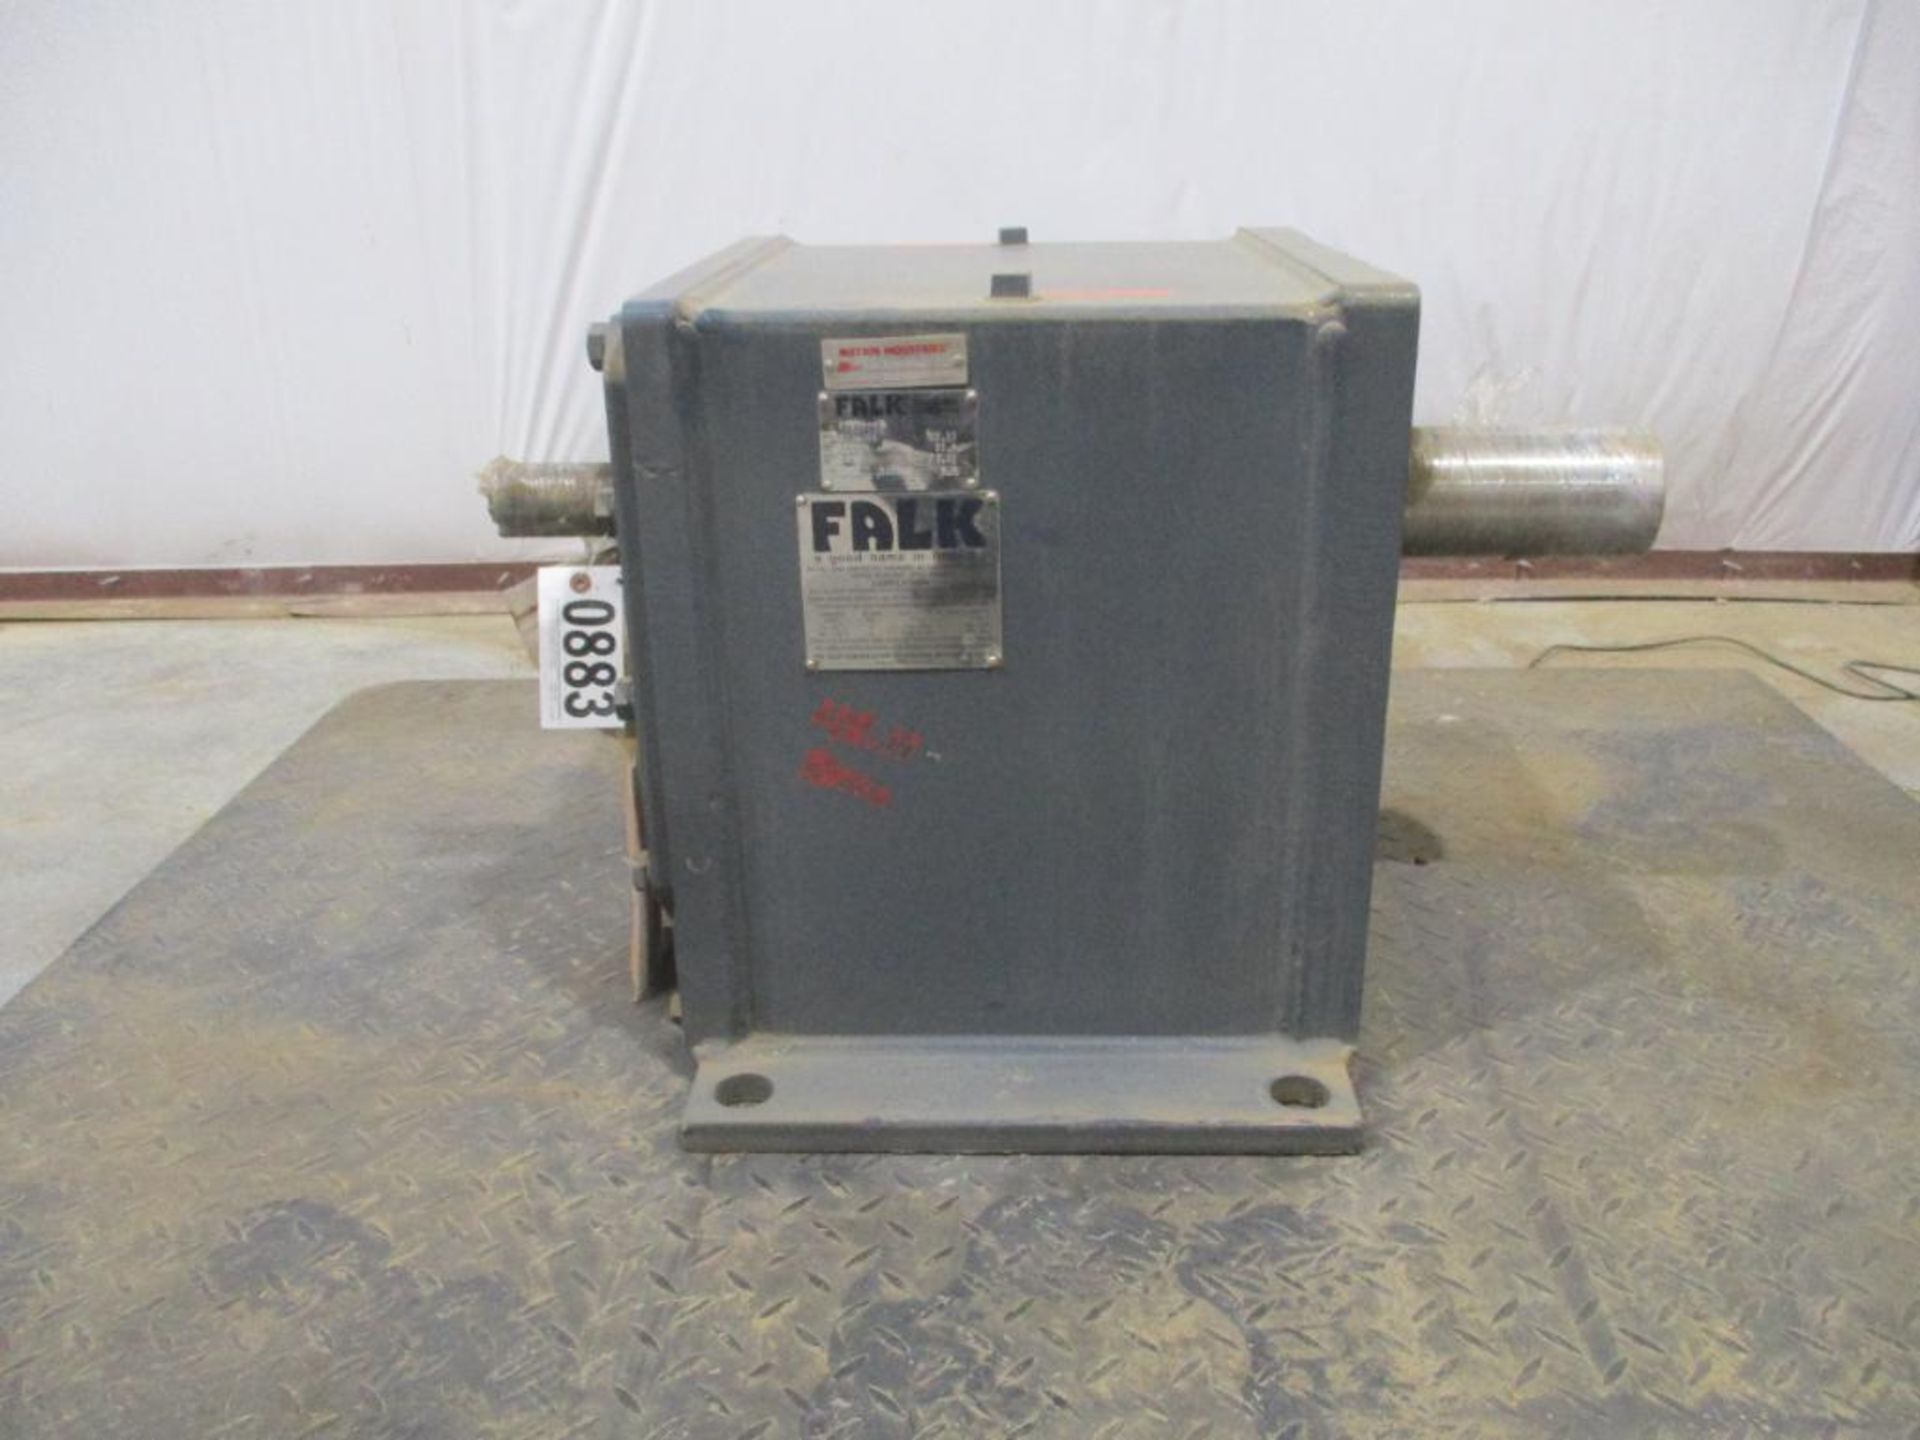 FALK 48.11 RATIO REDUCER P/N 1080FC3A, 727# lbs (There will be a $40 Rigging/Prep fee added to the i